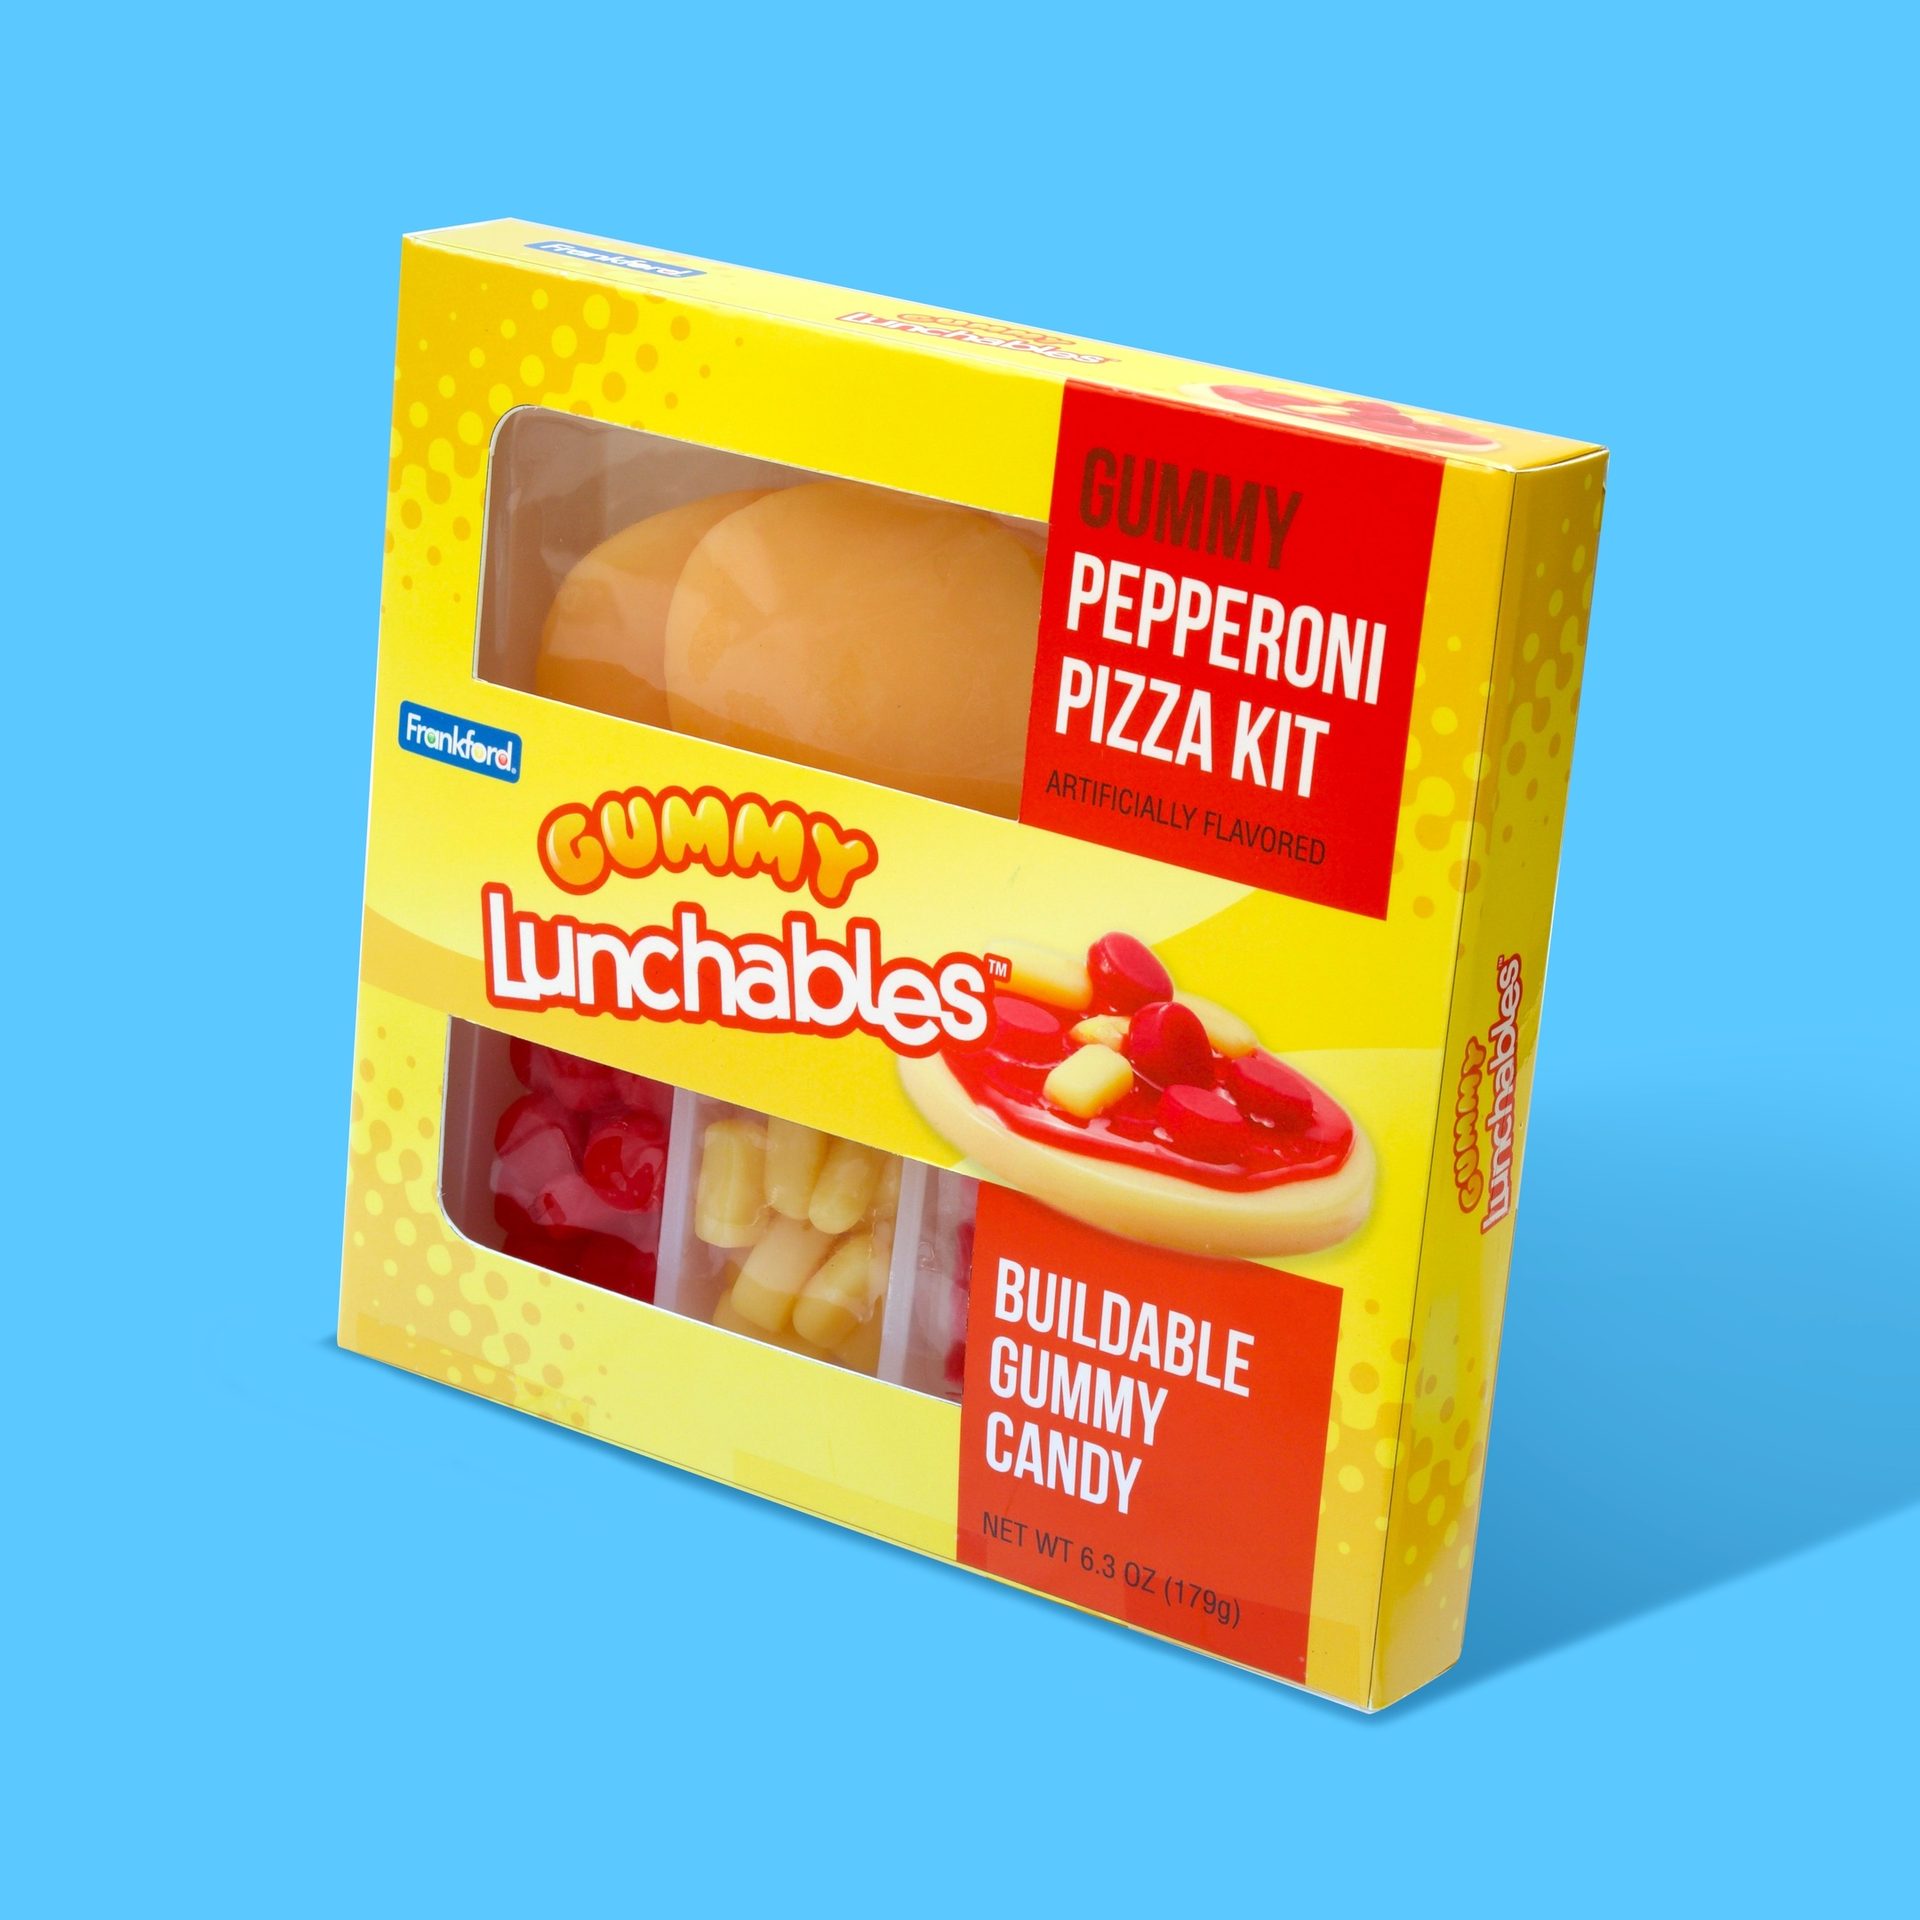 Rectangle, Snack box, Gummy Candy, Lunchables pizza snack